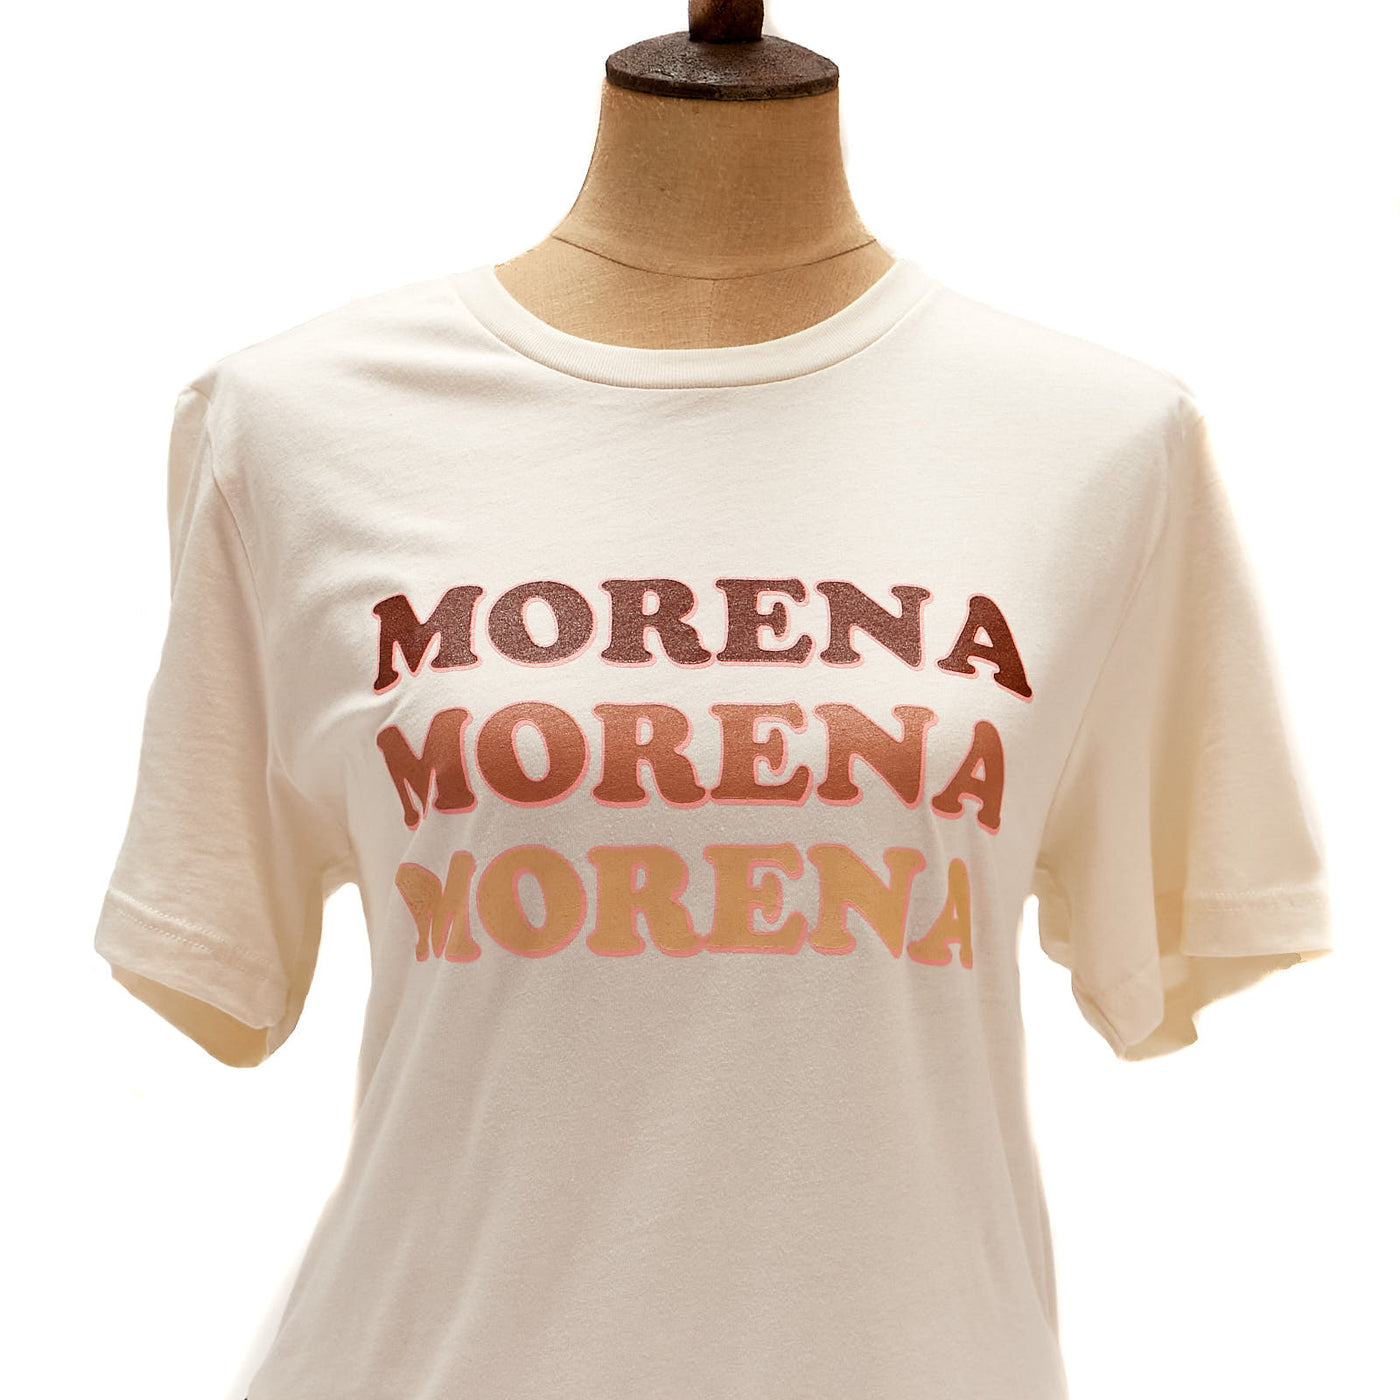 Light tan, "Morena" t-shirt pictured on mannequin. T-shirt features three different shades of brown with pink outline on phrase.